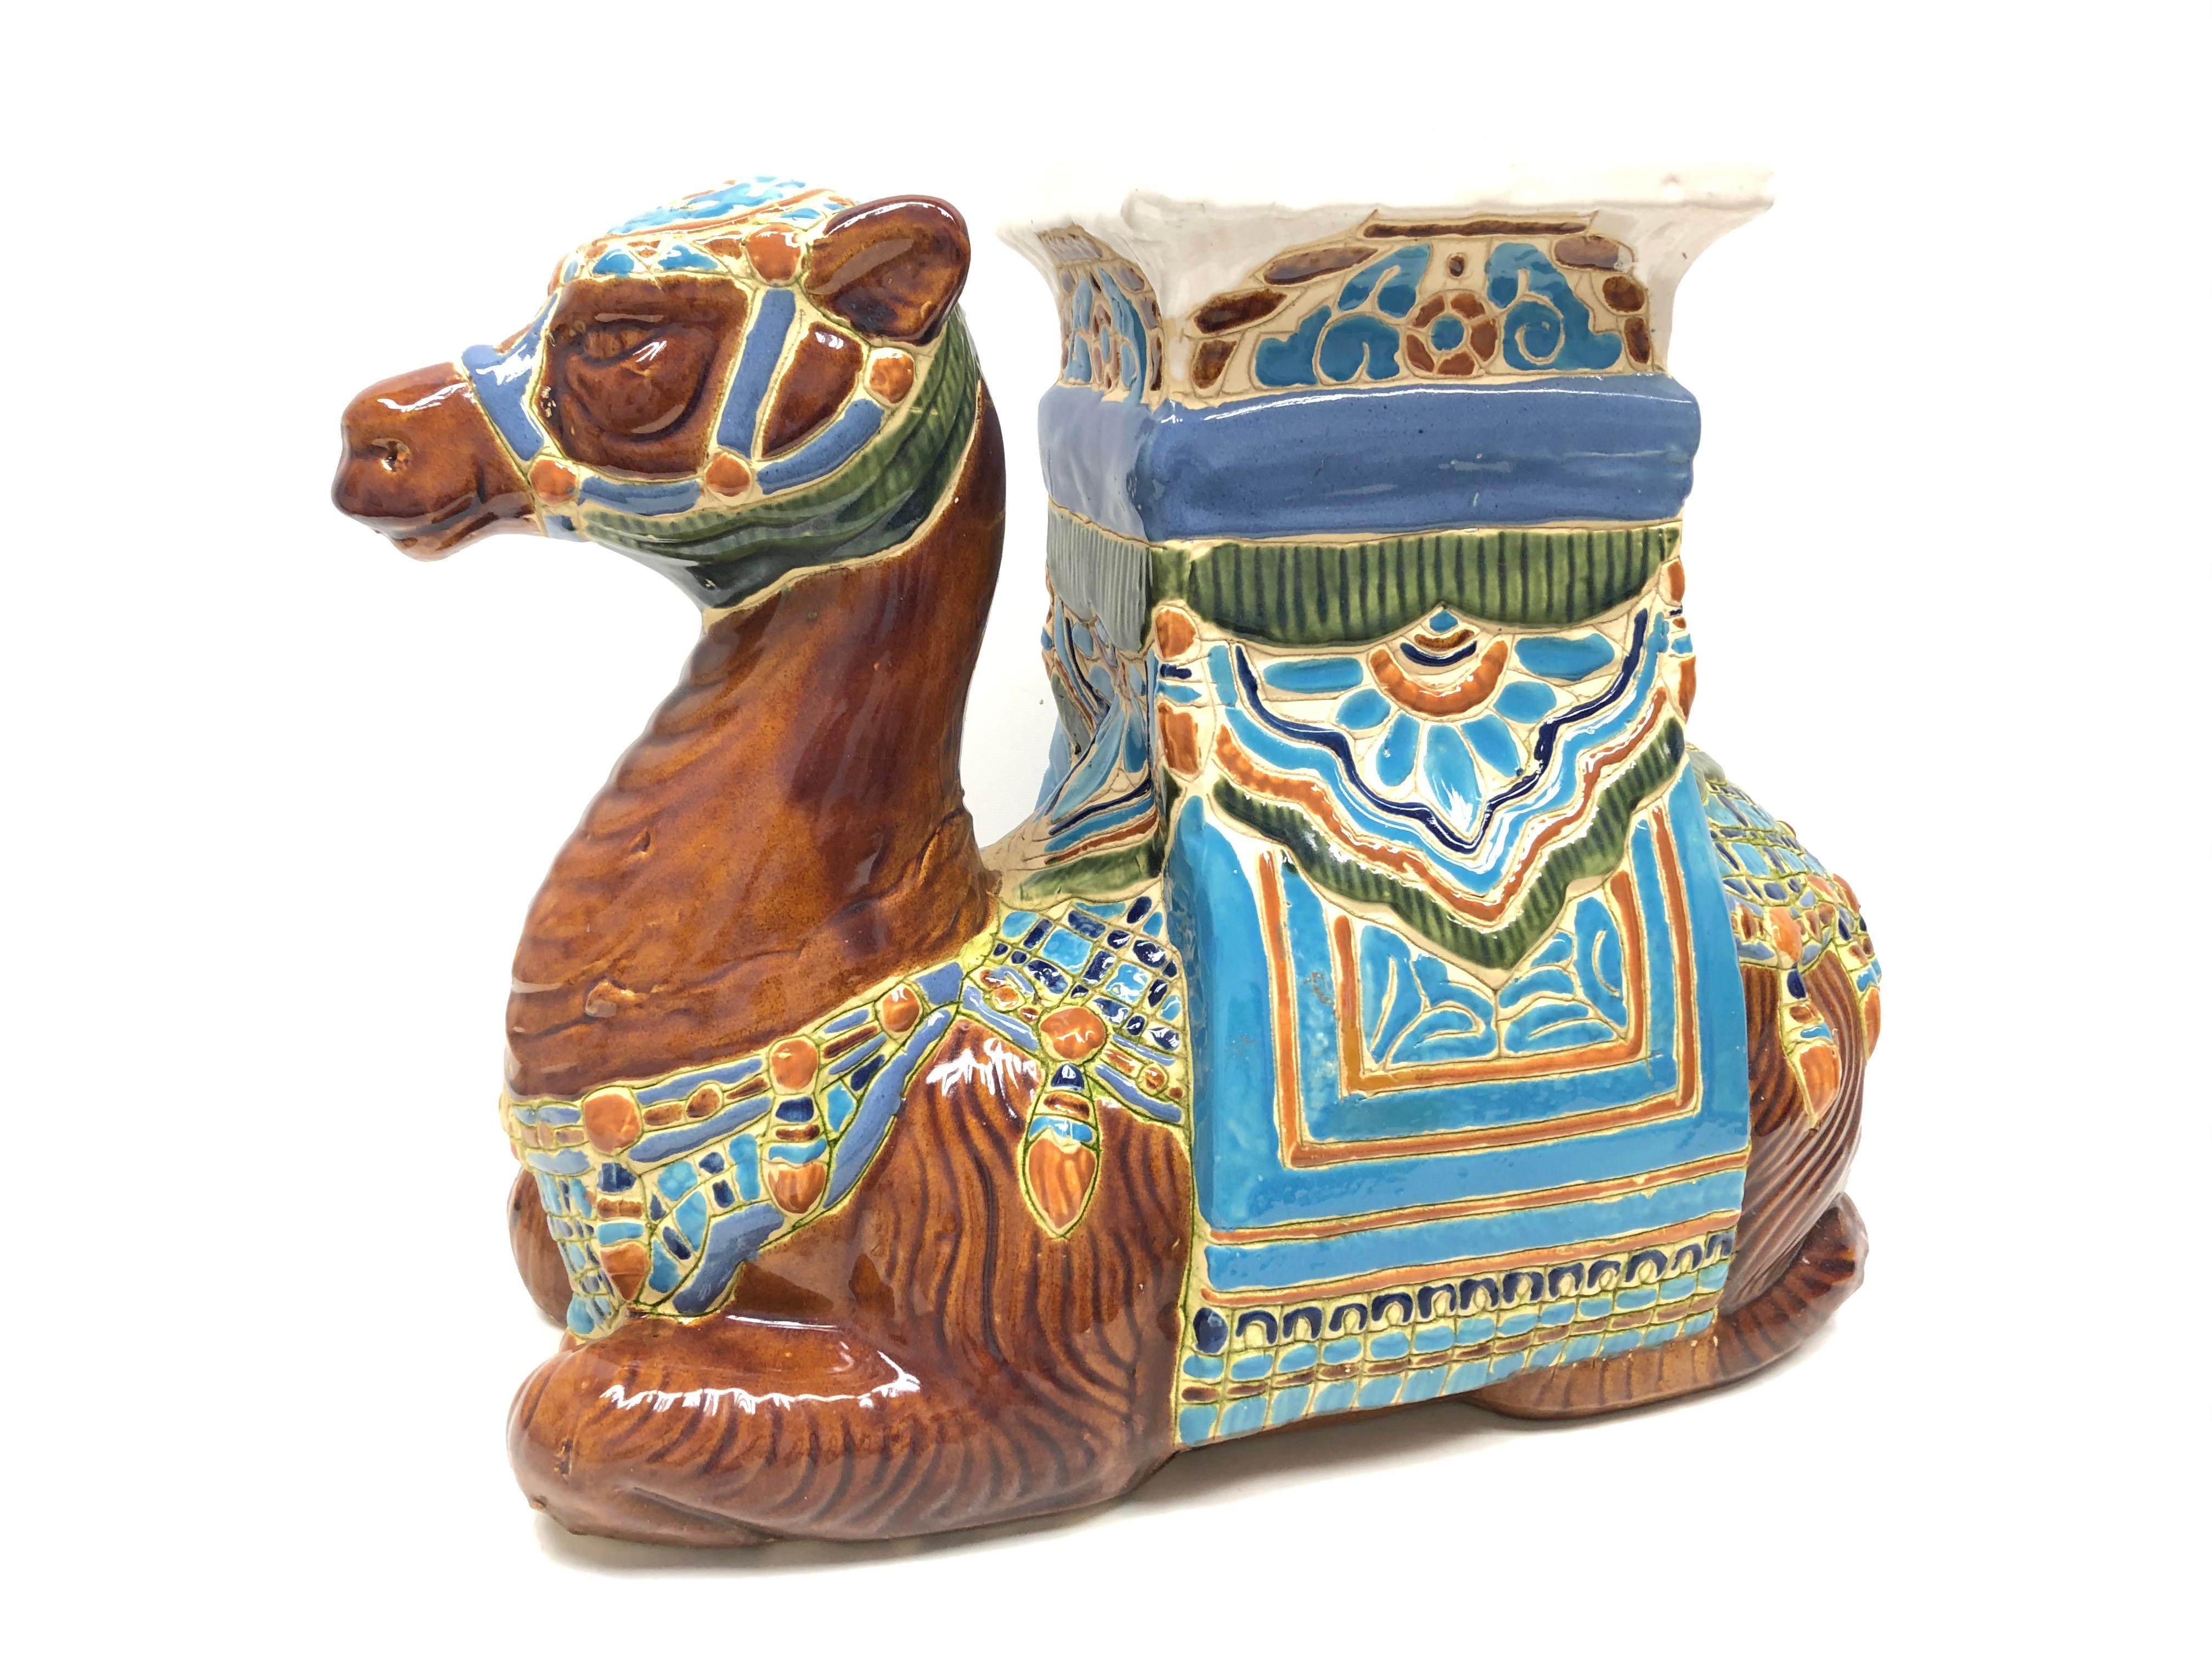 Mid-20th century glazed ceramic camel garden stool, flower pot seat or side table. Handcrafted ceramic. Nice addition to your home, patio or garden area.
              